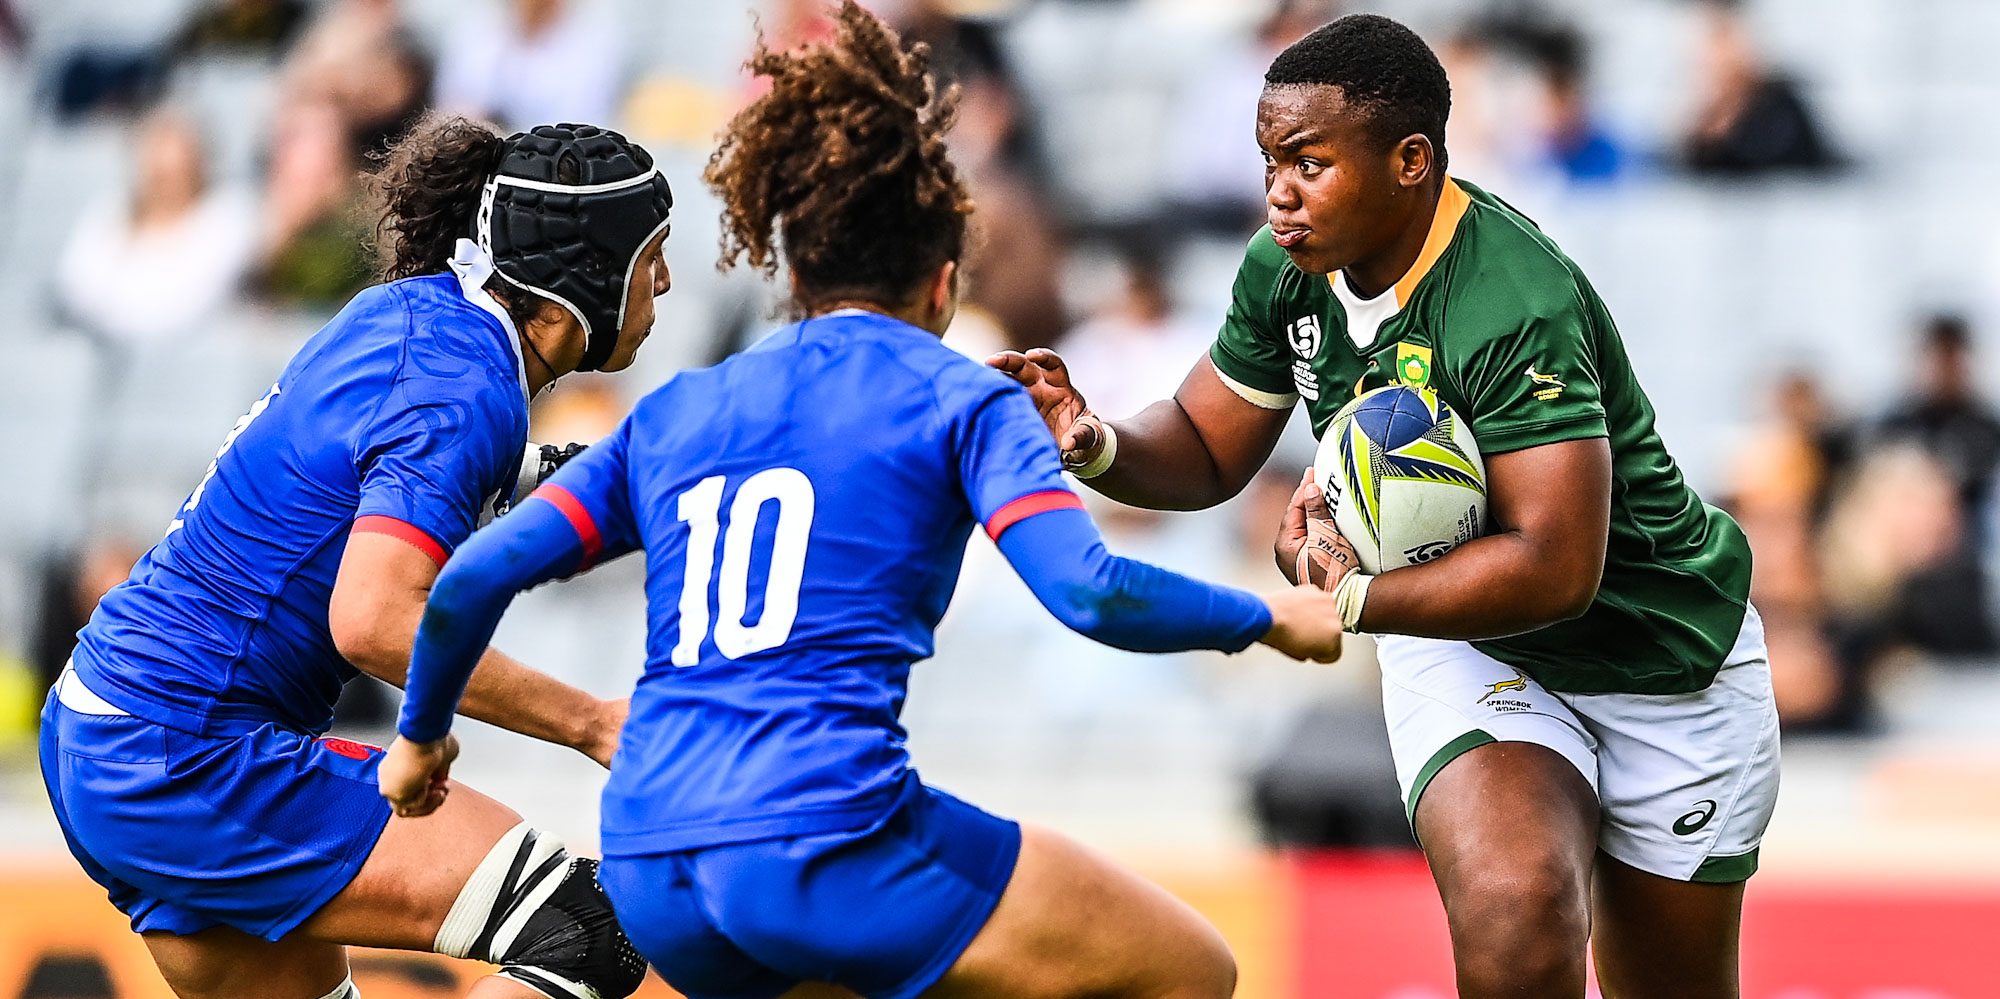 Babalwa Latsha in action against France at the Rugby World Cup last year.